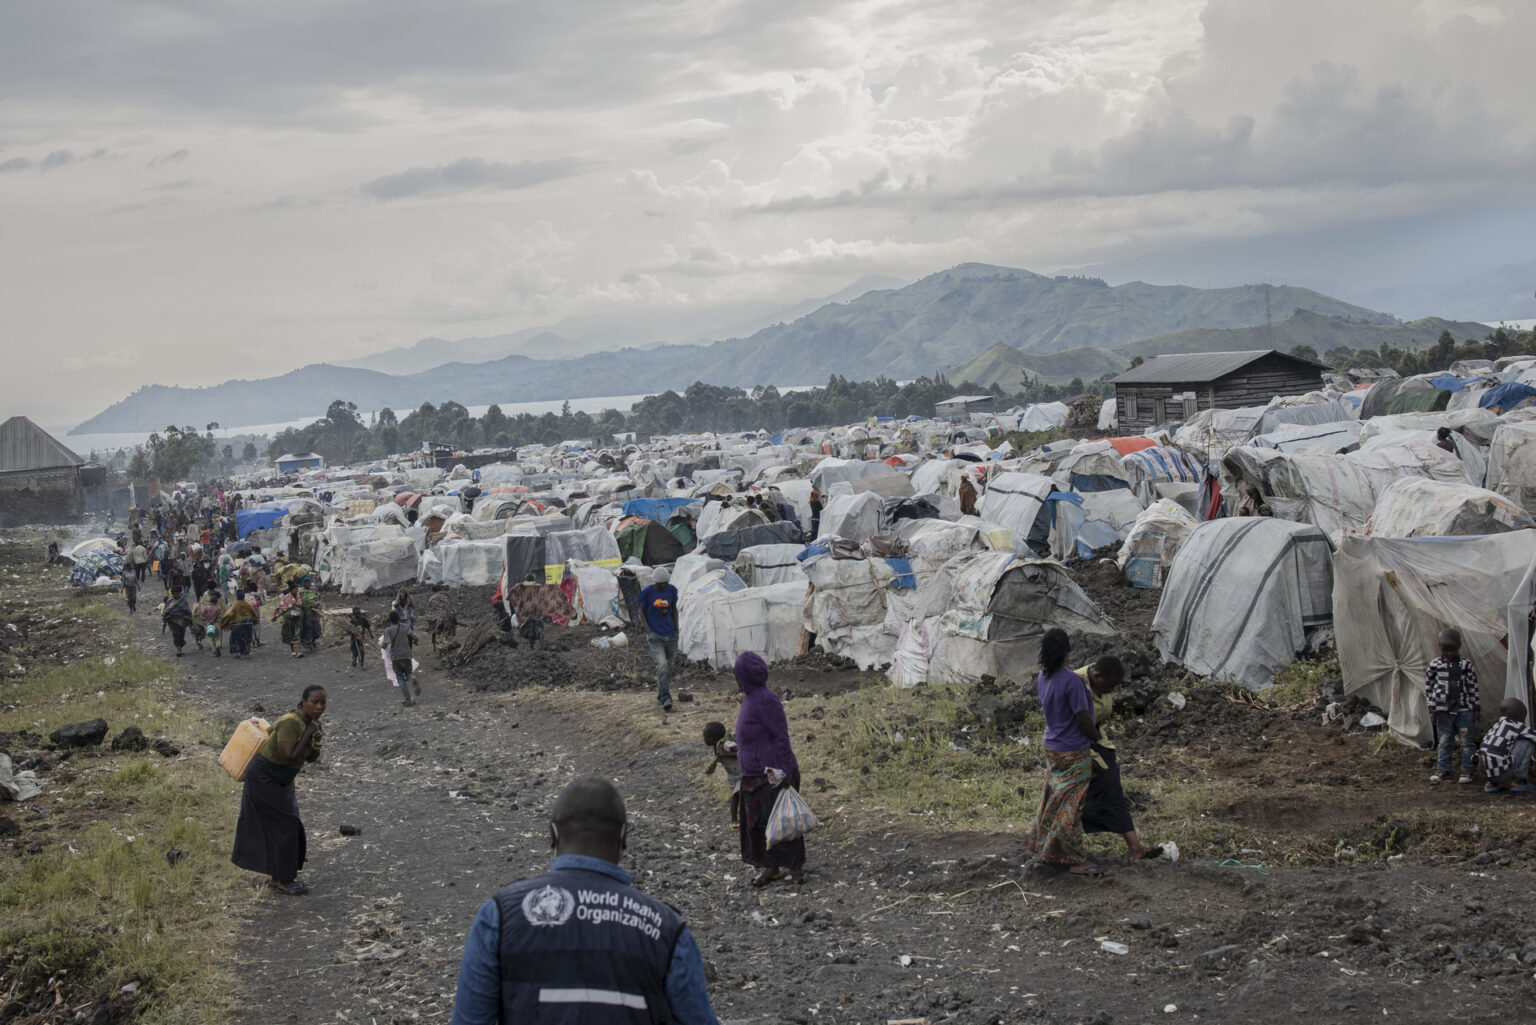 DR Congo Facing Alarming Levels of Violence, Hunger, Poverty, Disease